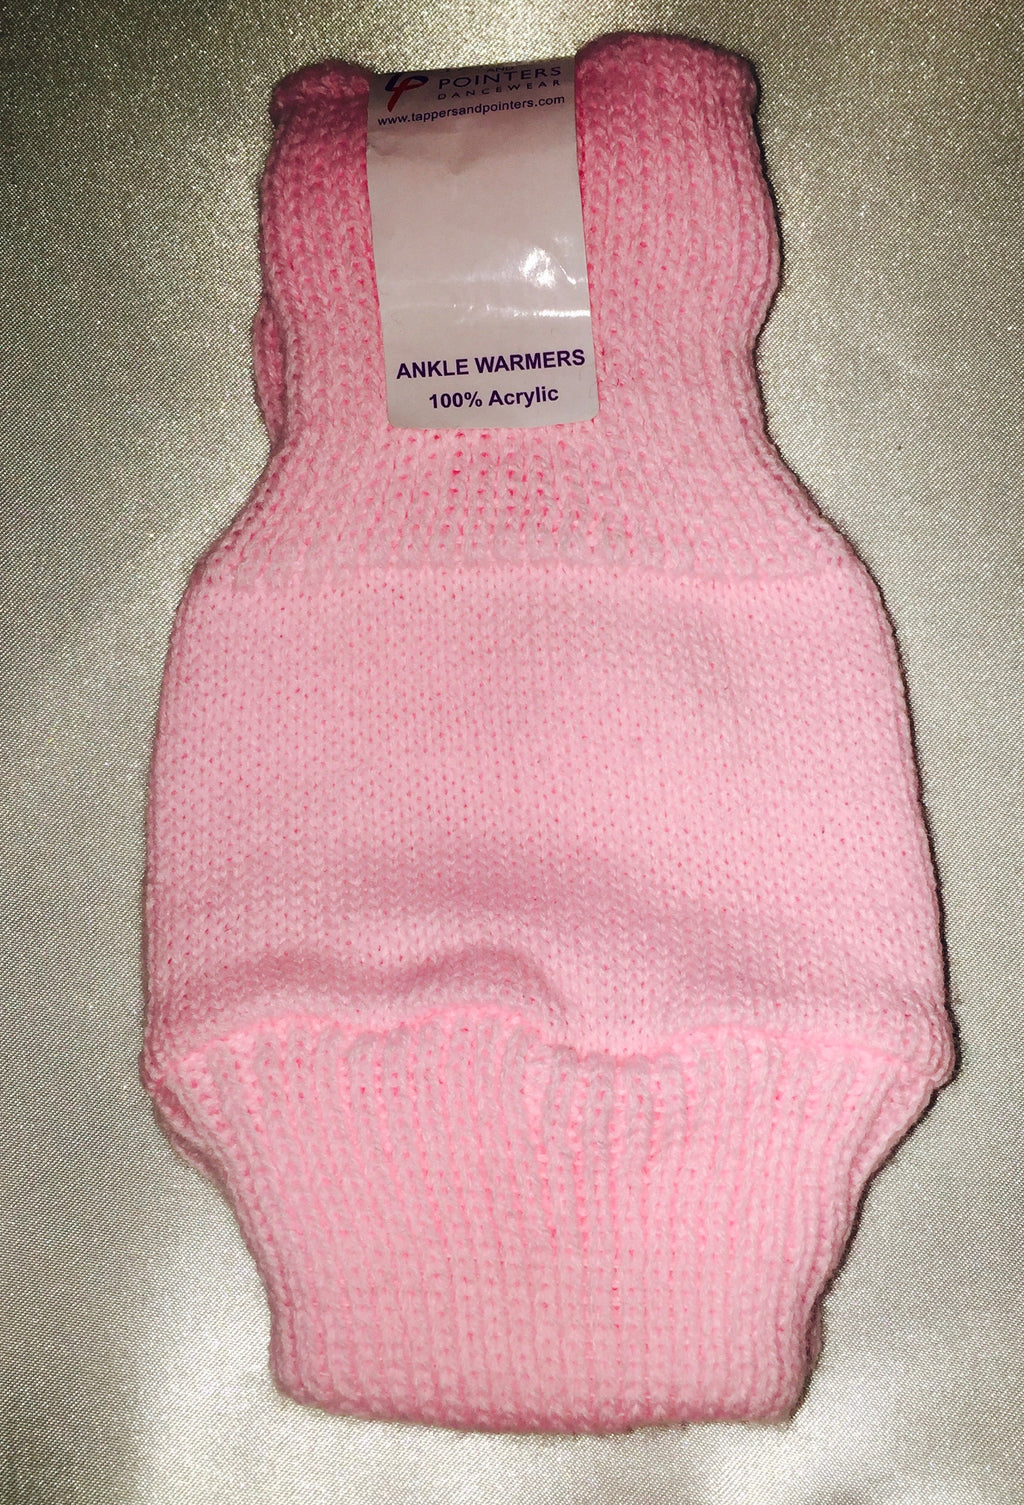 Pastel Pink Children's Ankle Warmers